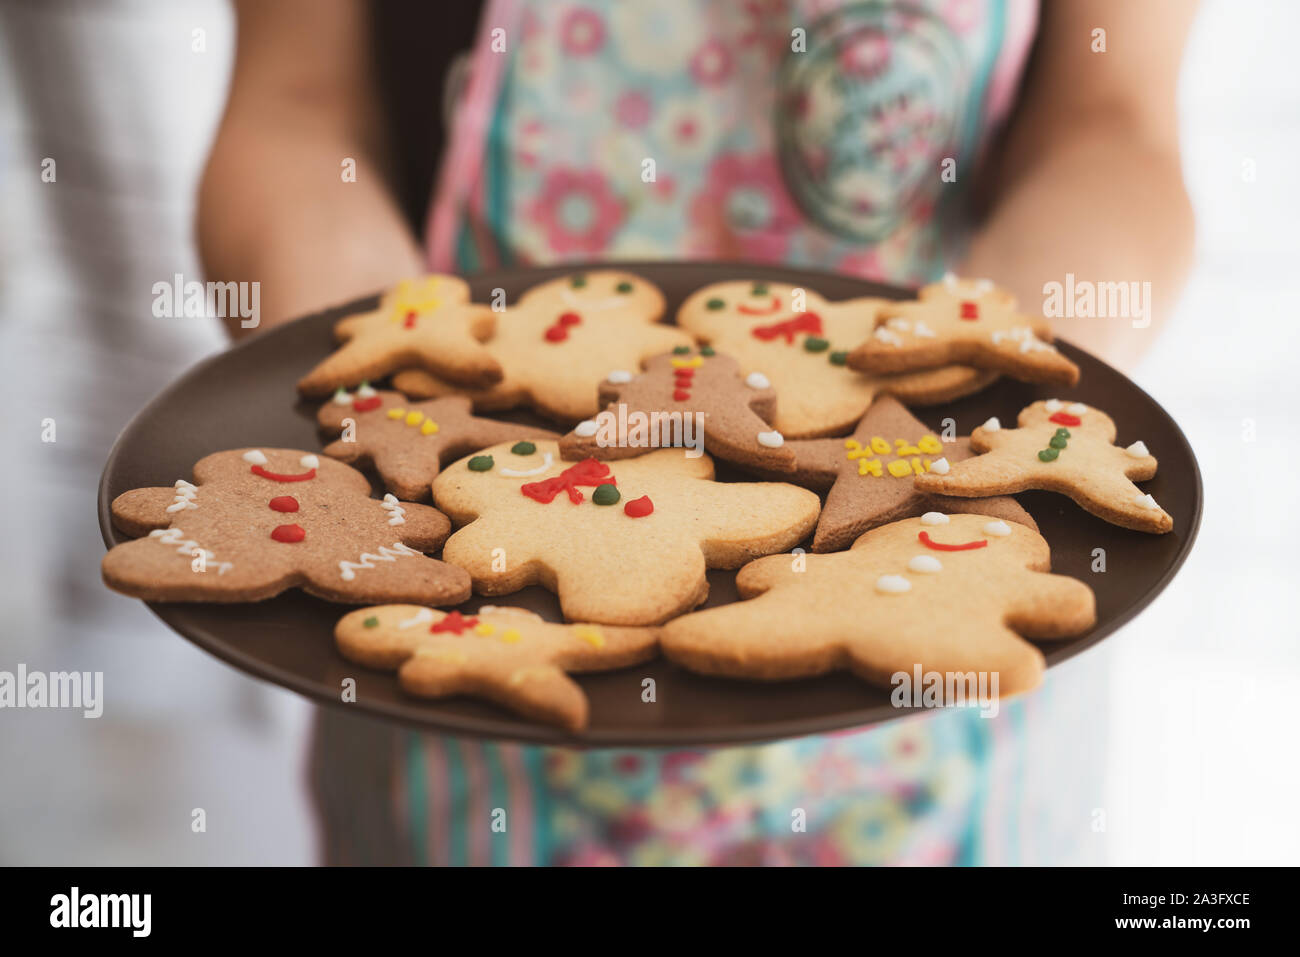 Serving traditional gingerbread cookies for new year celebration. Stock Photo